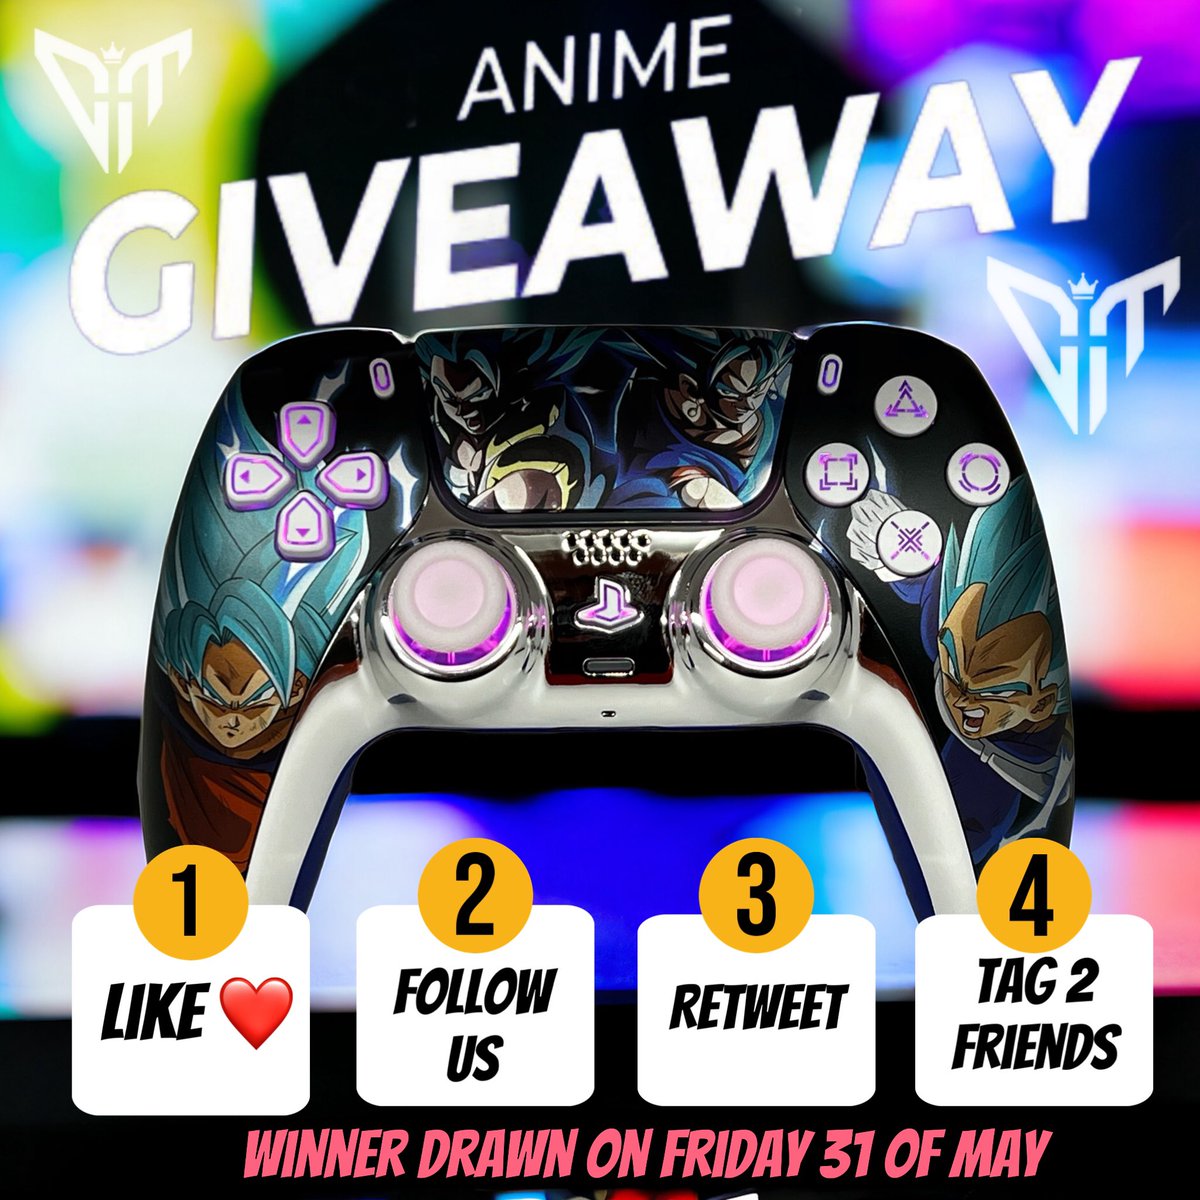 Enter to win your very own Anime-inspired Pro Controller! 🎮✨ Follow these 4 simple steps for a chance to win:
1️⃣ Like this post
2️⃣ Follow us on X 
3️⃣ Retweet
4️⃣ Tag 2 Friends
Winner will be announced on Friday, May 31st at 8 PM. Don't miss out on your chance to level up your